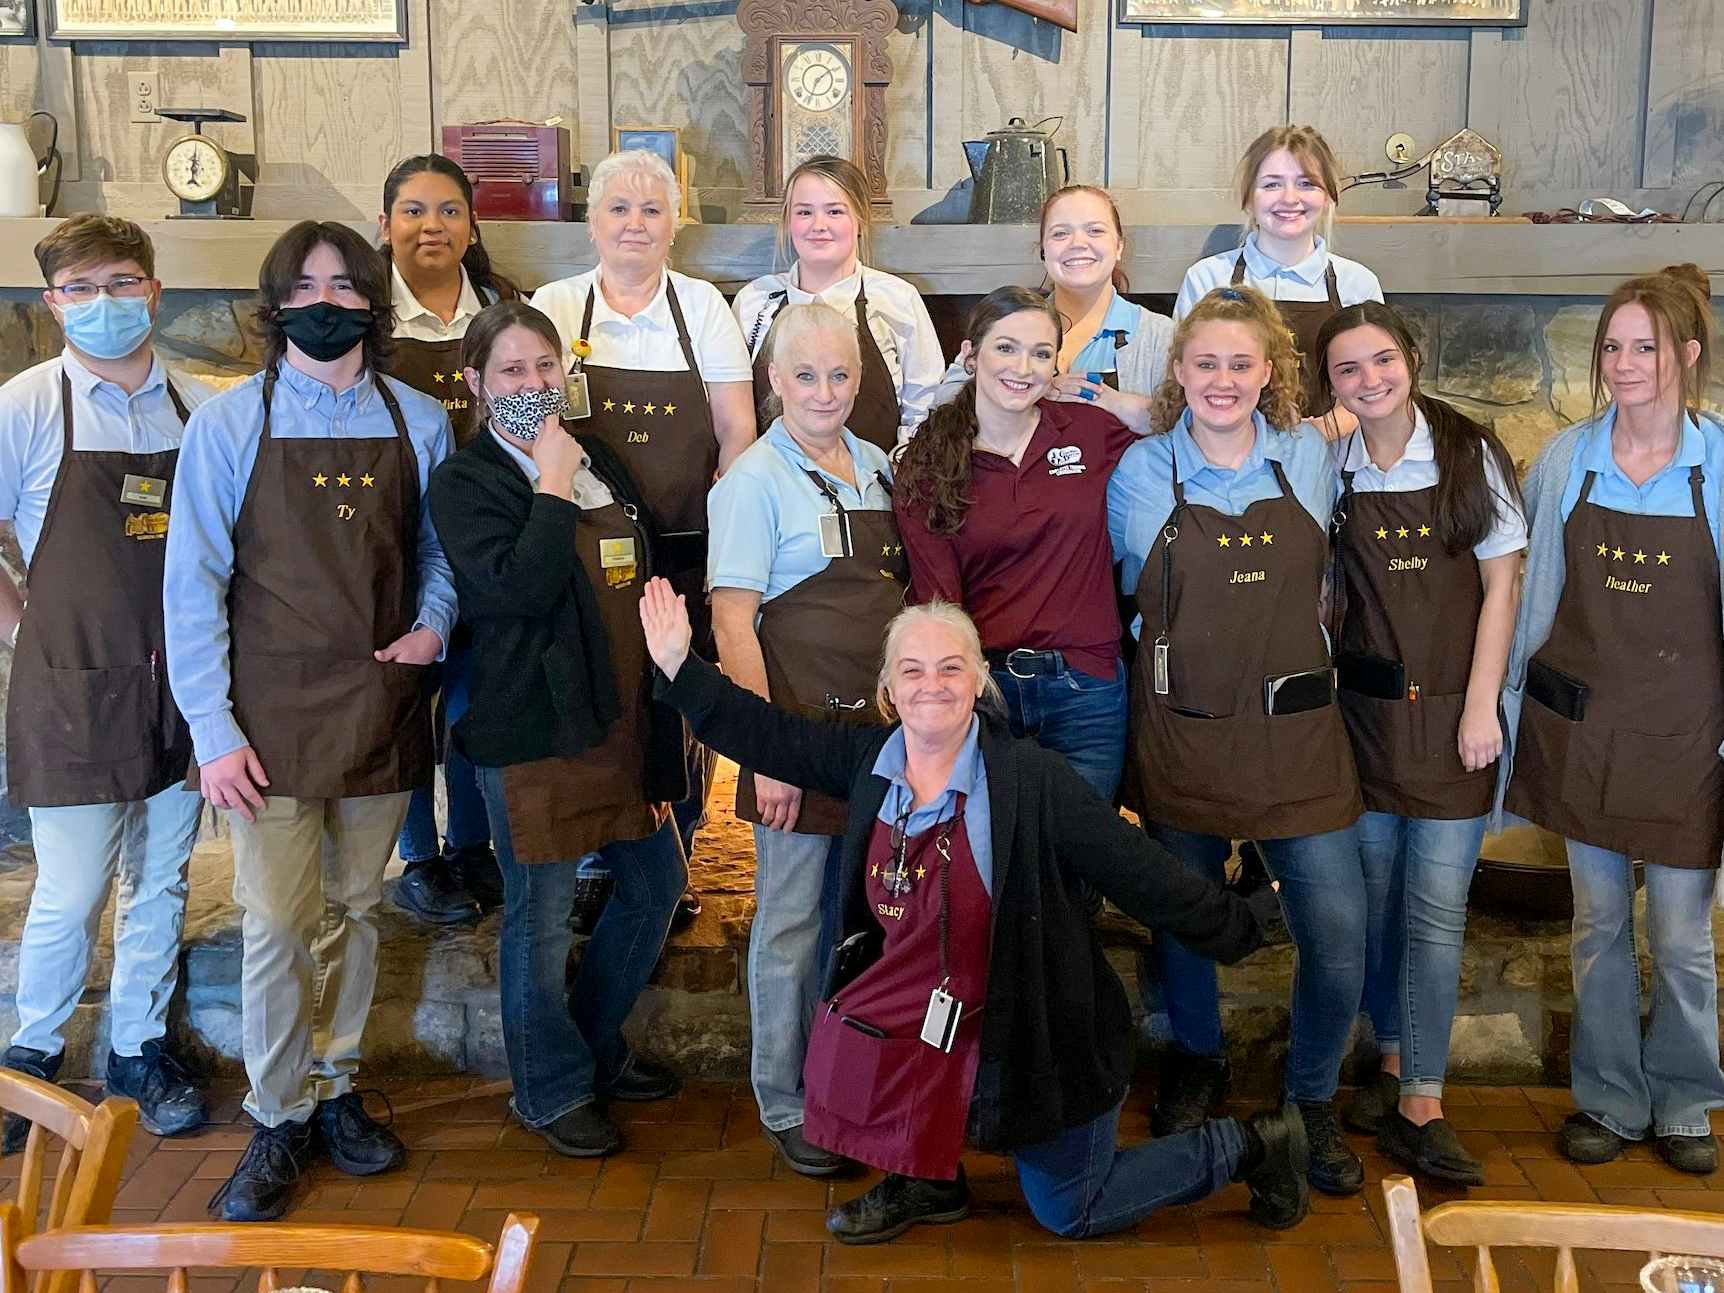 A group of Cracker Barrel employees posing in front of a Cracker Barrel fireplace. 